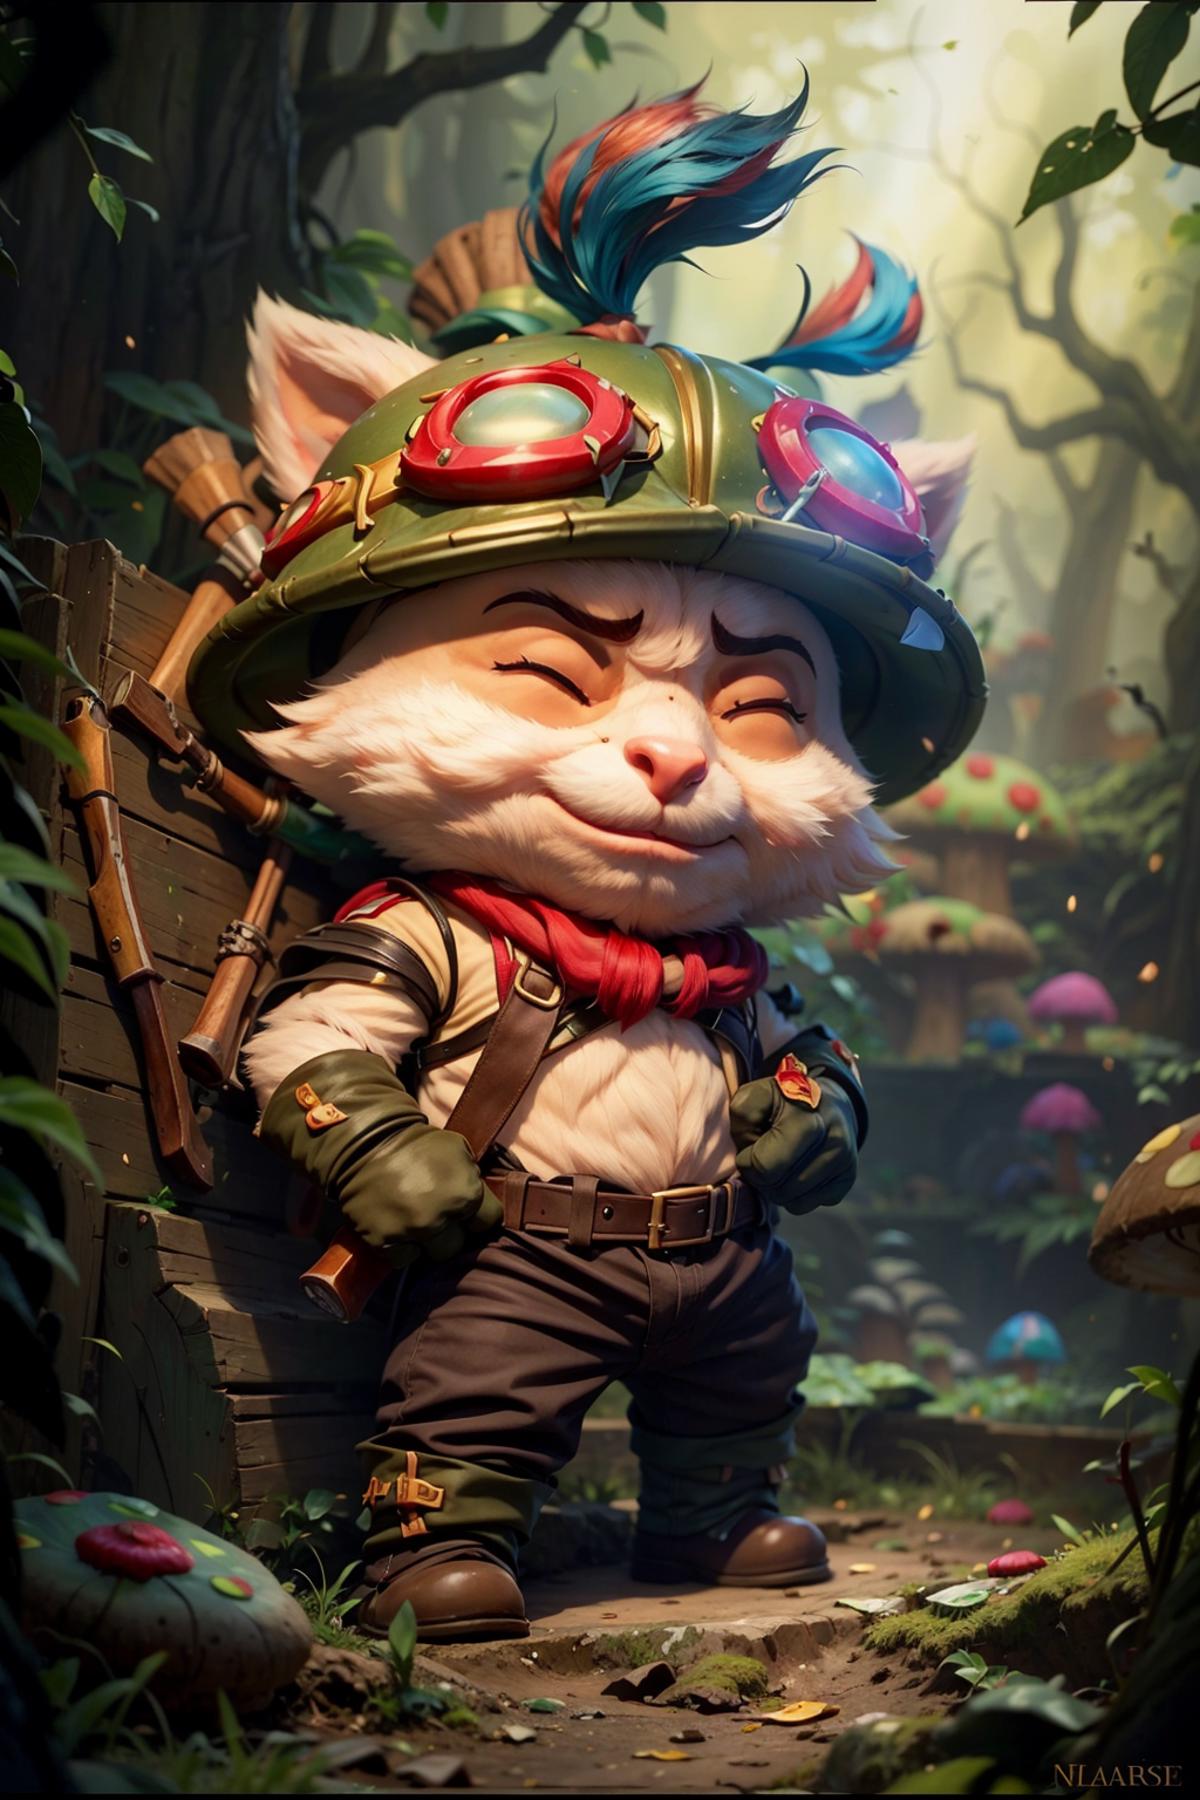 Teemo League of Legends image by Ggrue